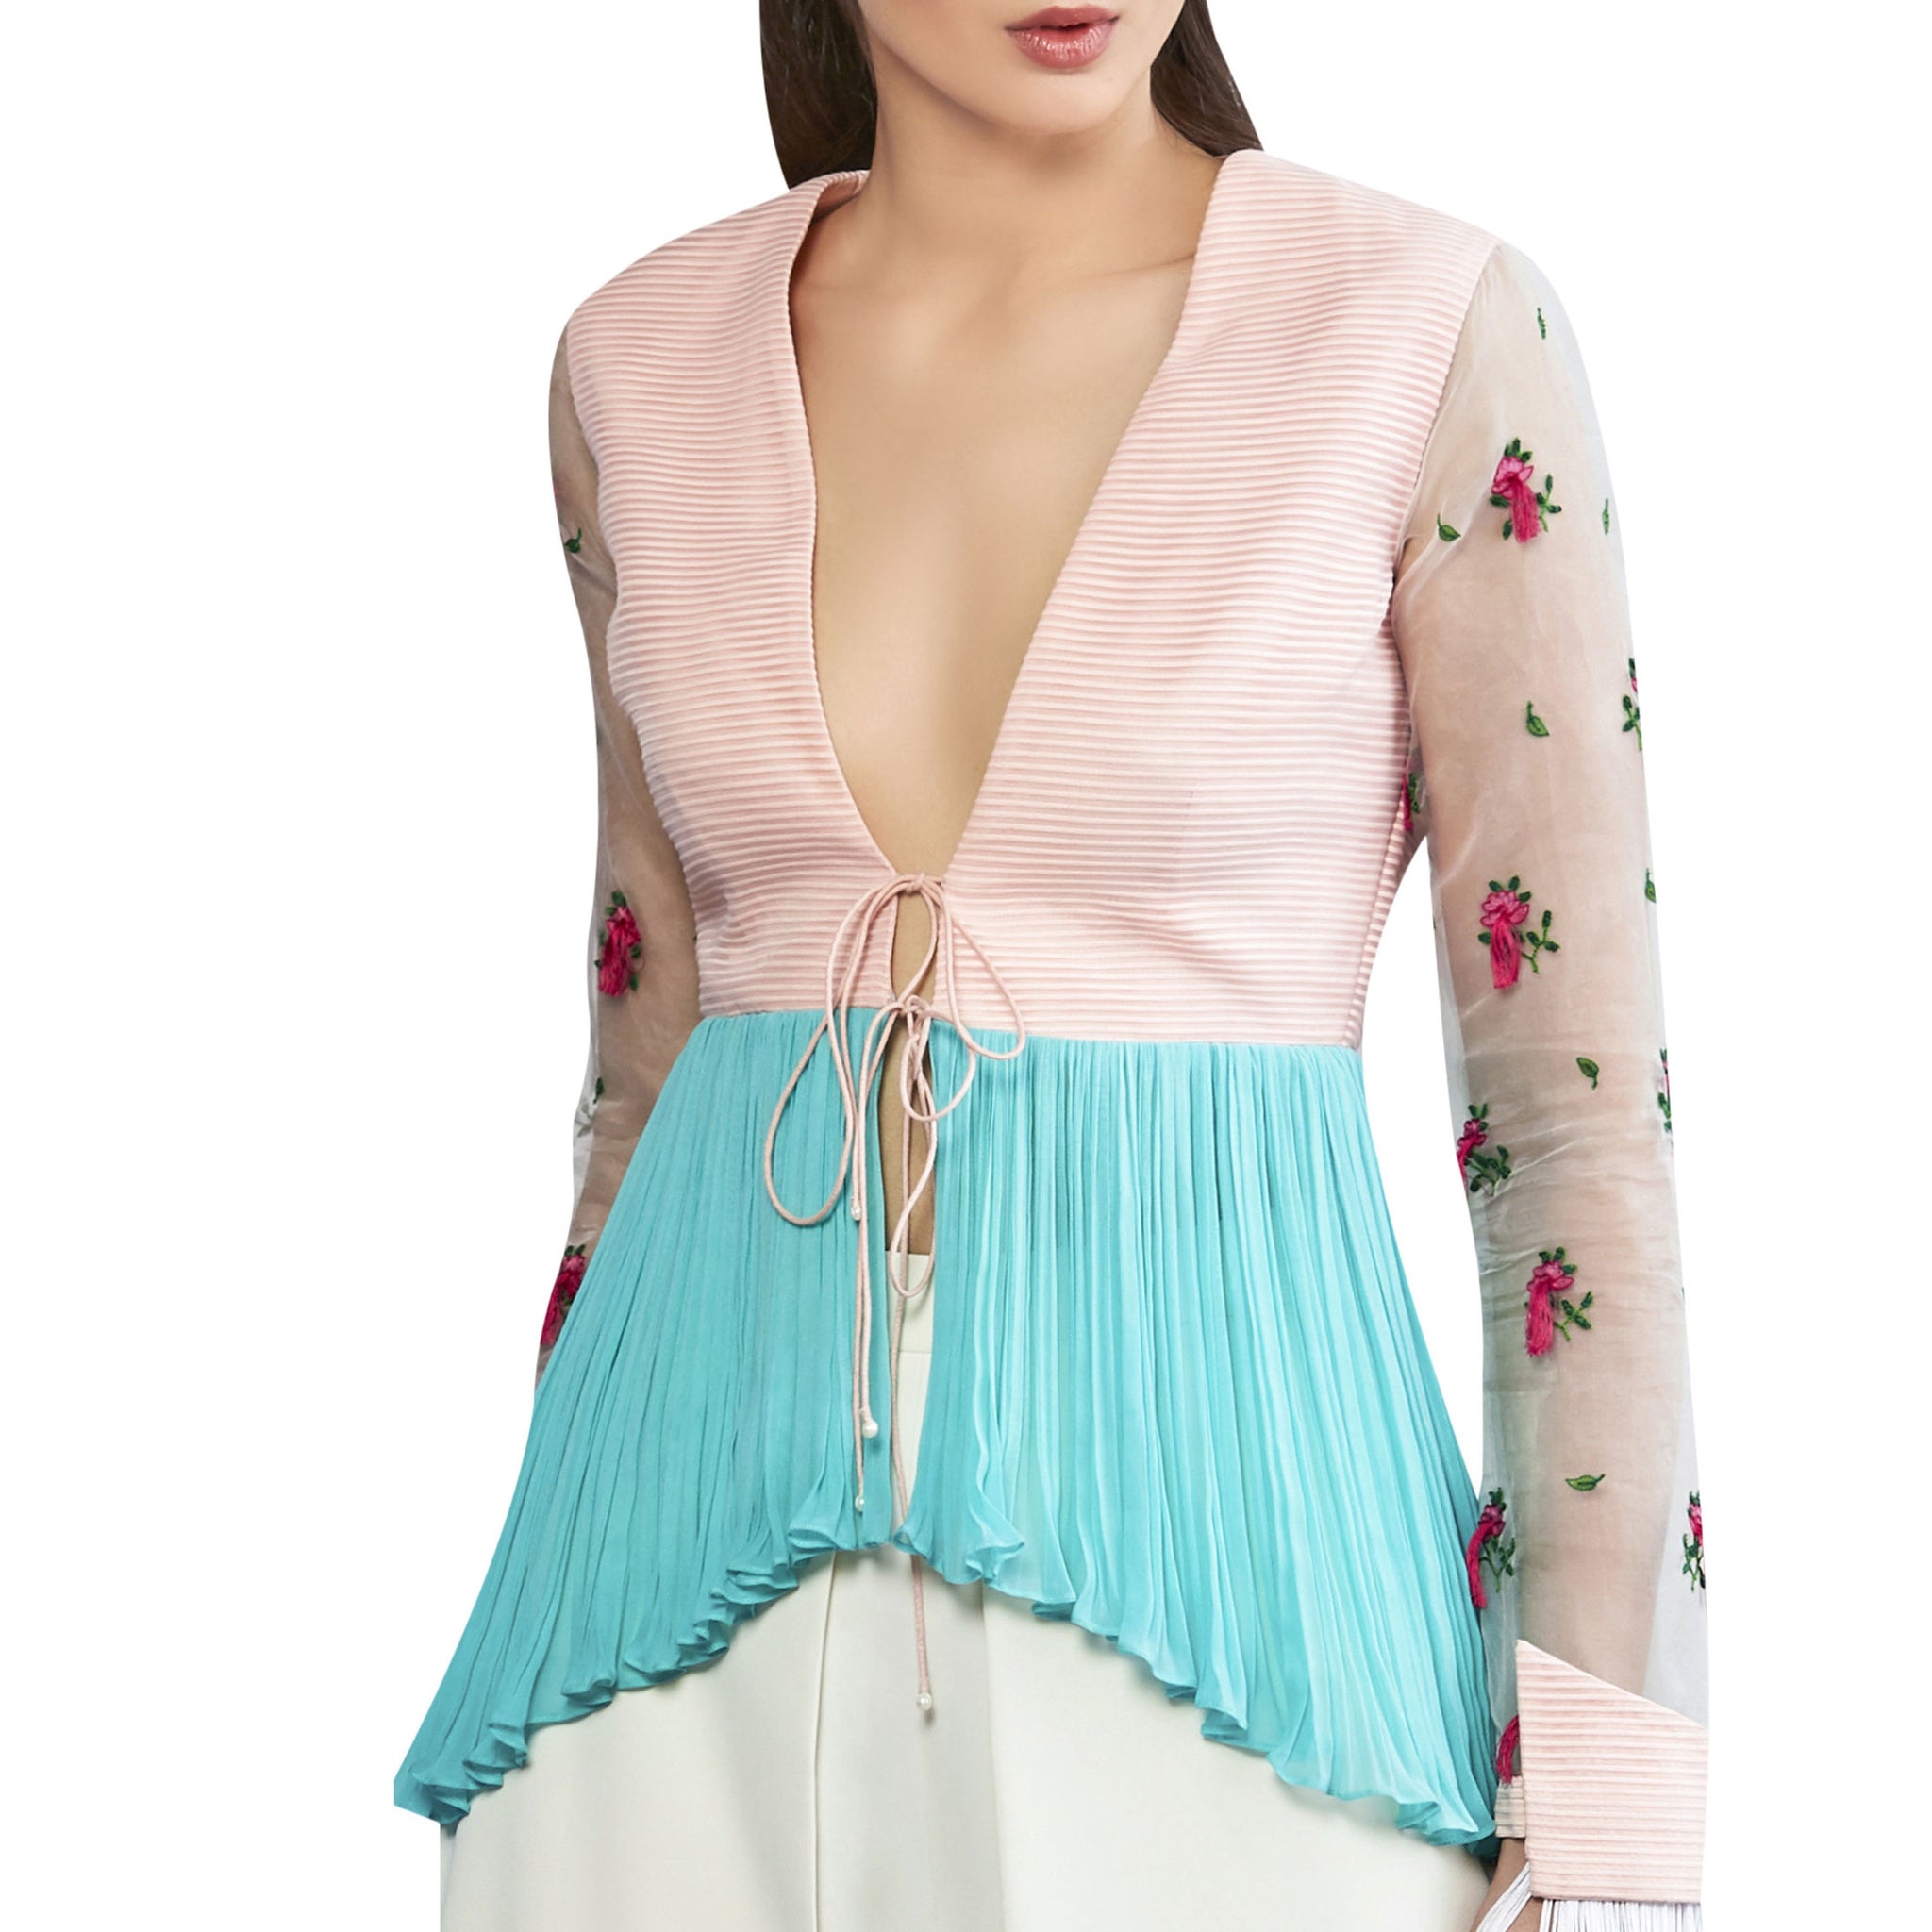 Peplum Jacket with Embroidered Sleeves and Tassles